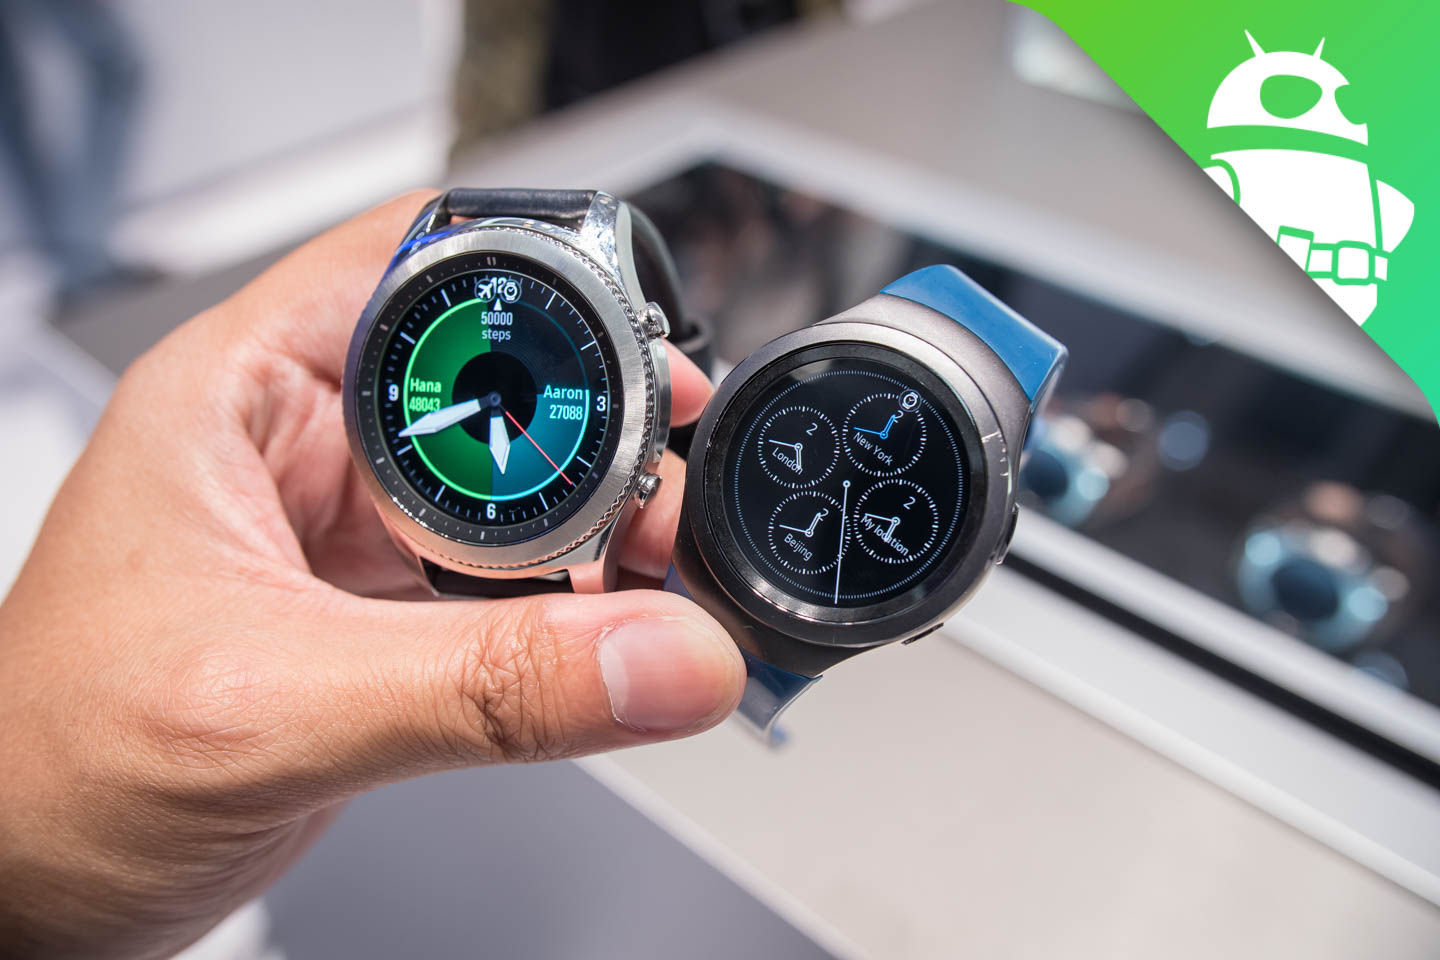 Samsung Gear S3 vs Gear S2 comparison - Android Authority